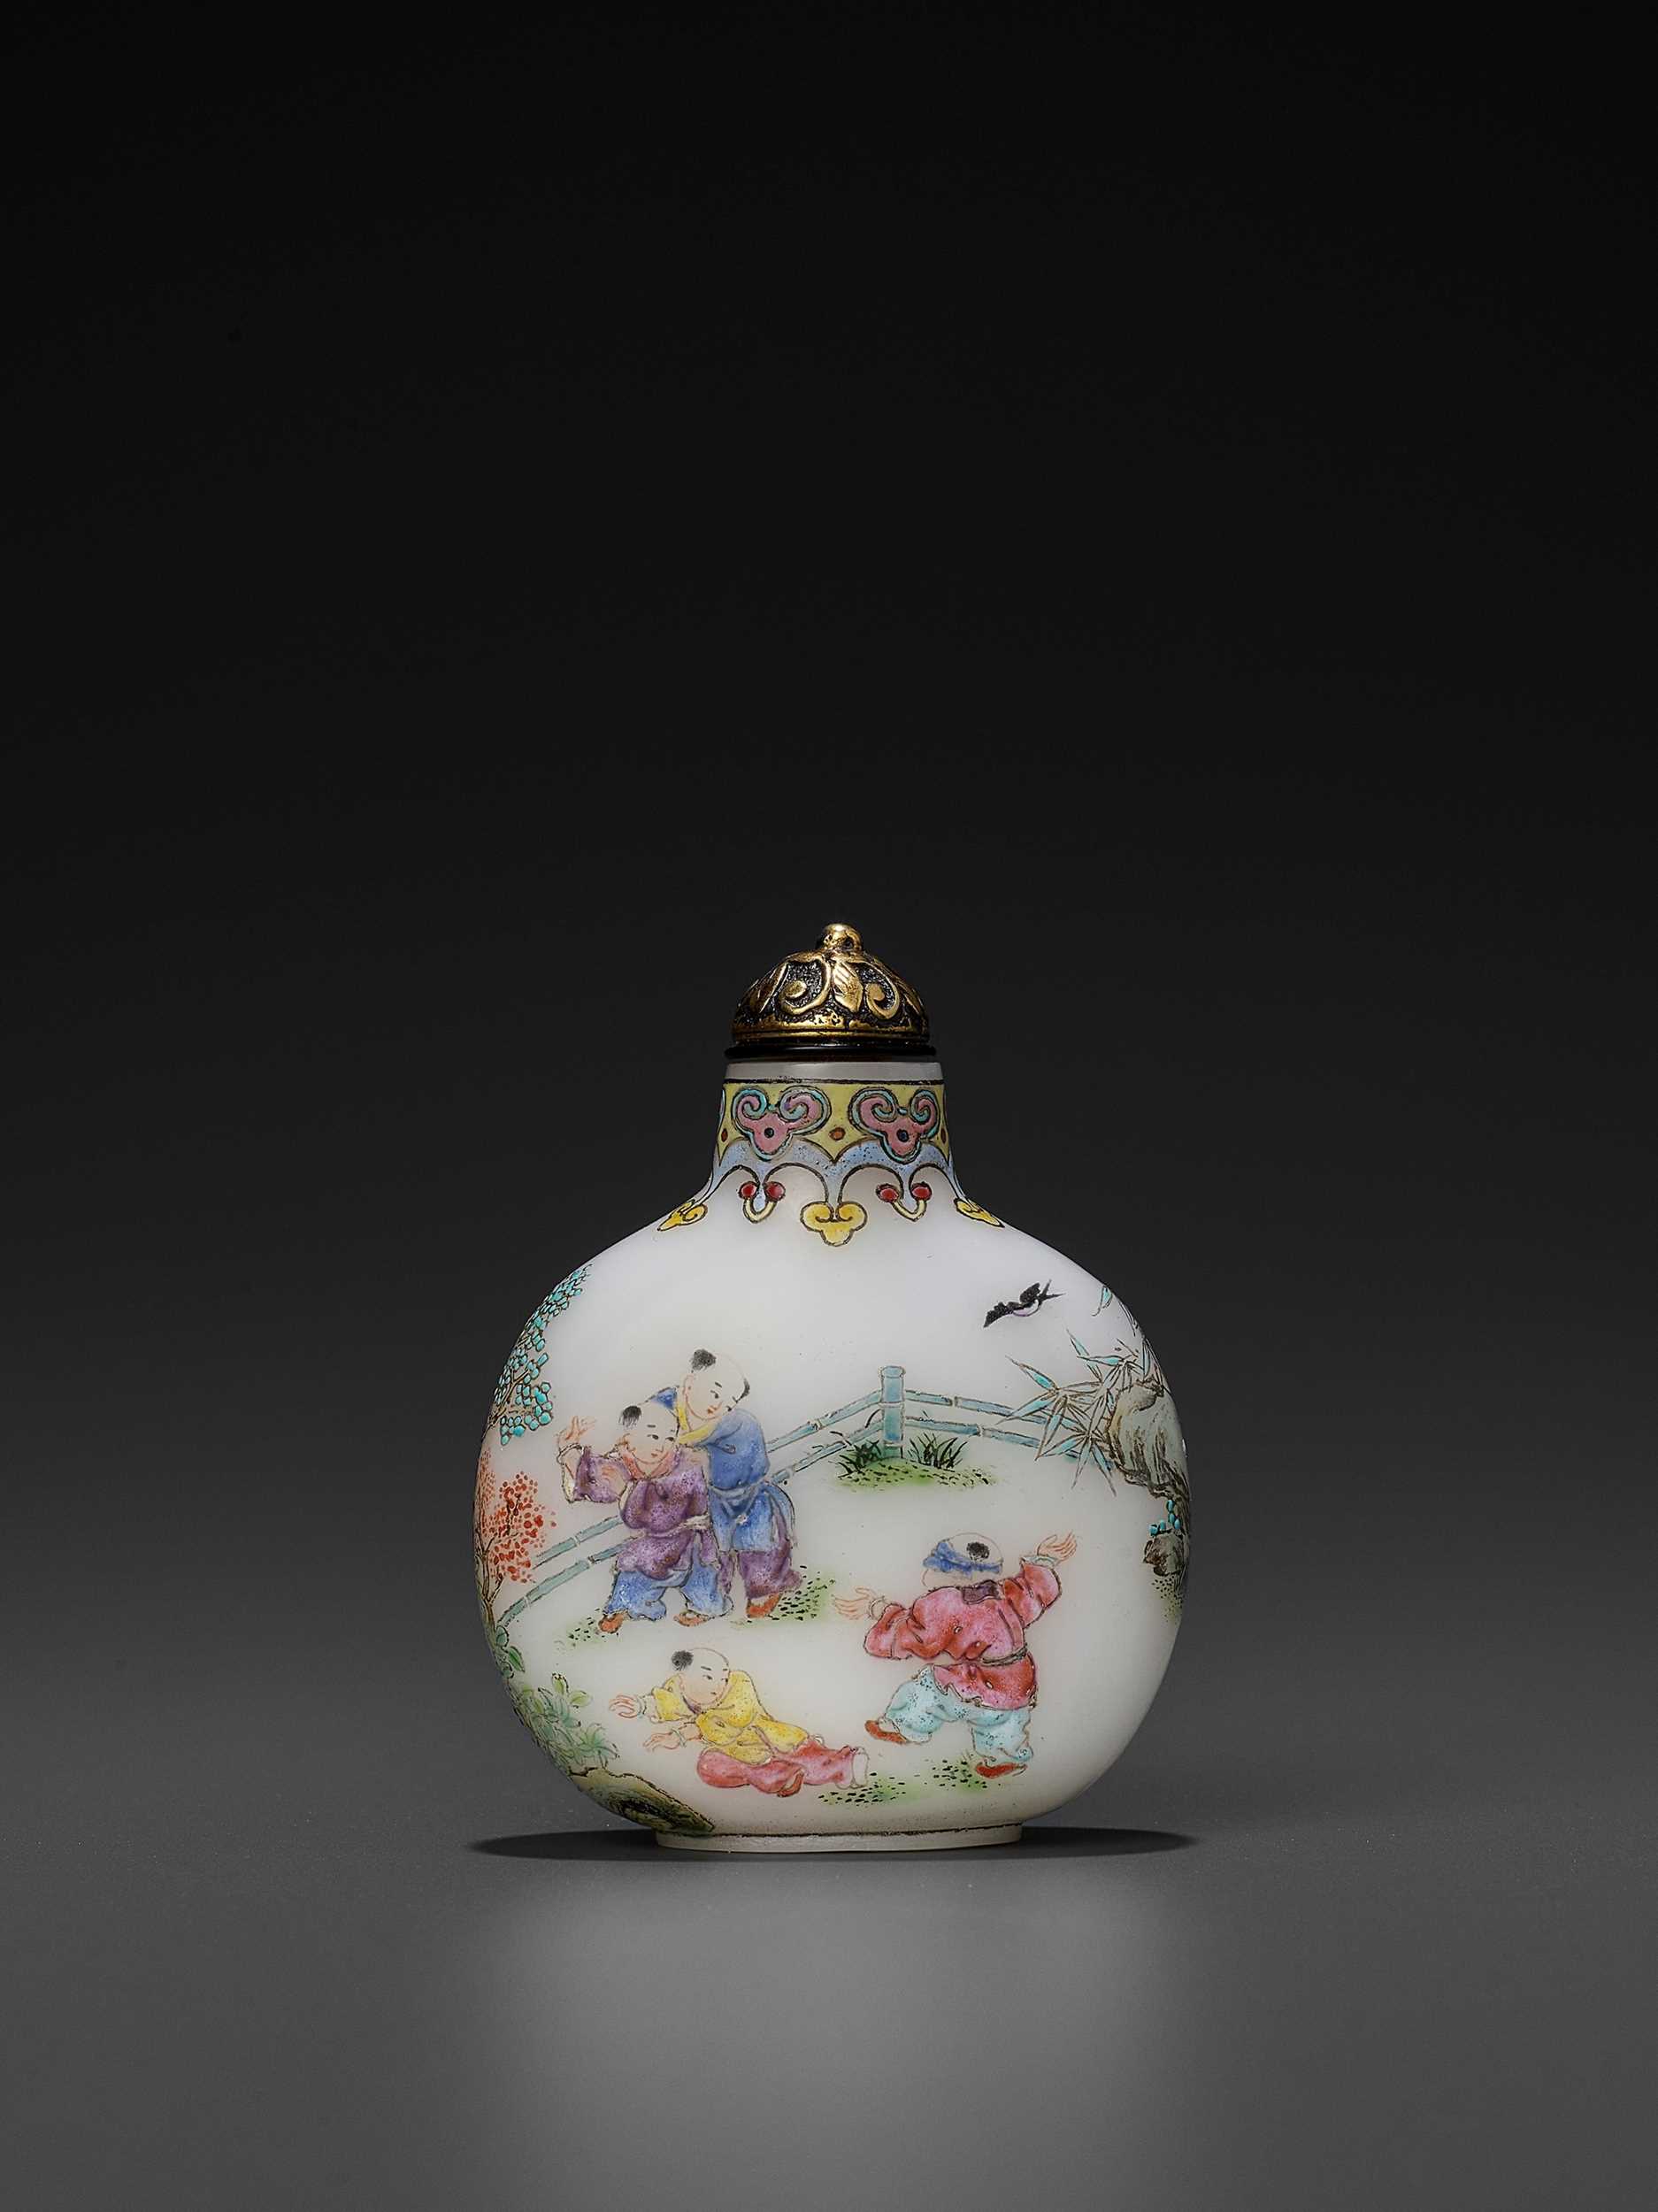 Lot 390 - AN IMPERIAL ENAMELED WHITE GLASS ‘BOYS’ SNUFF BOTTLE, QIANLONG MARK AND PERIOD